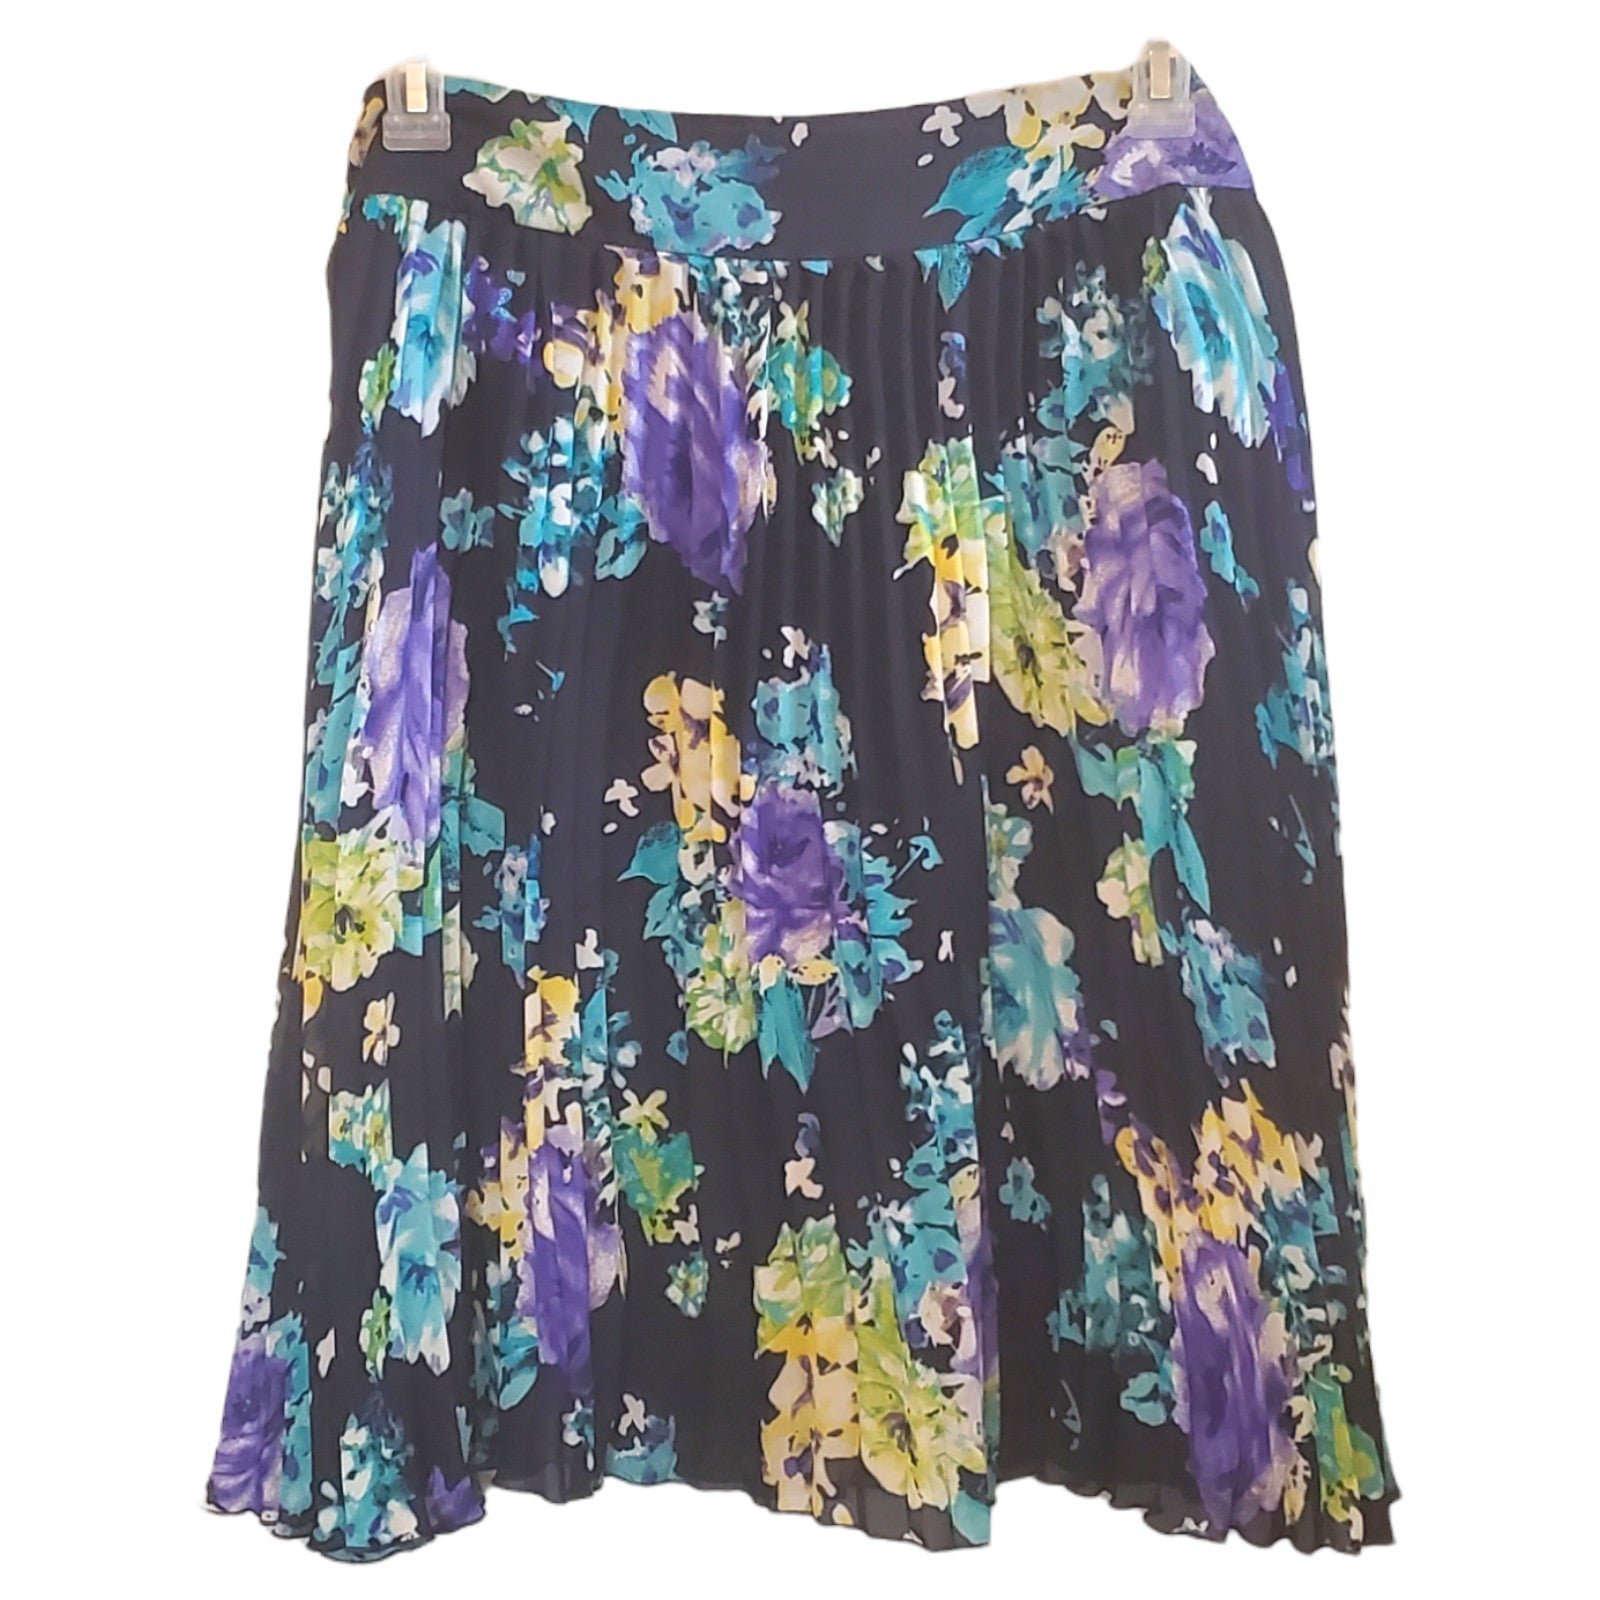 cheapest place to buy  Charter Club Womens Floral Skirt Size 16 Navy Blue Pleated Knee Length NWT oA1I5RuBp Counter Genuine 